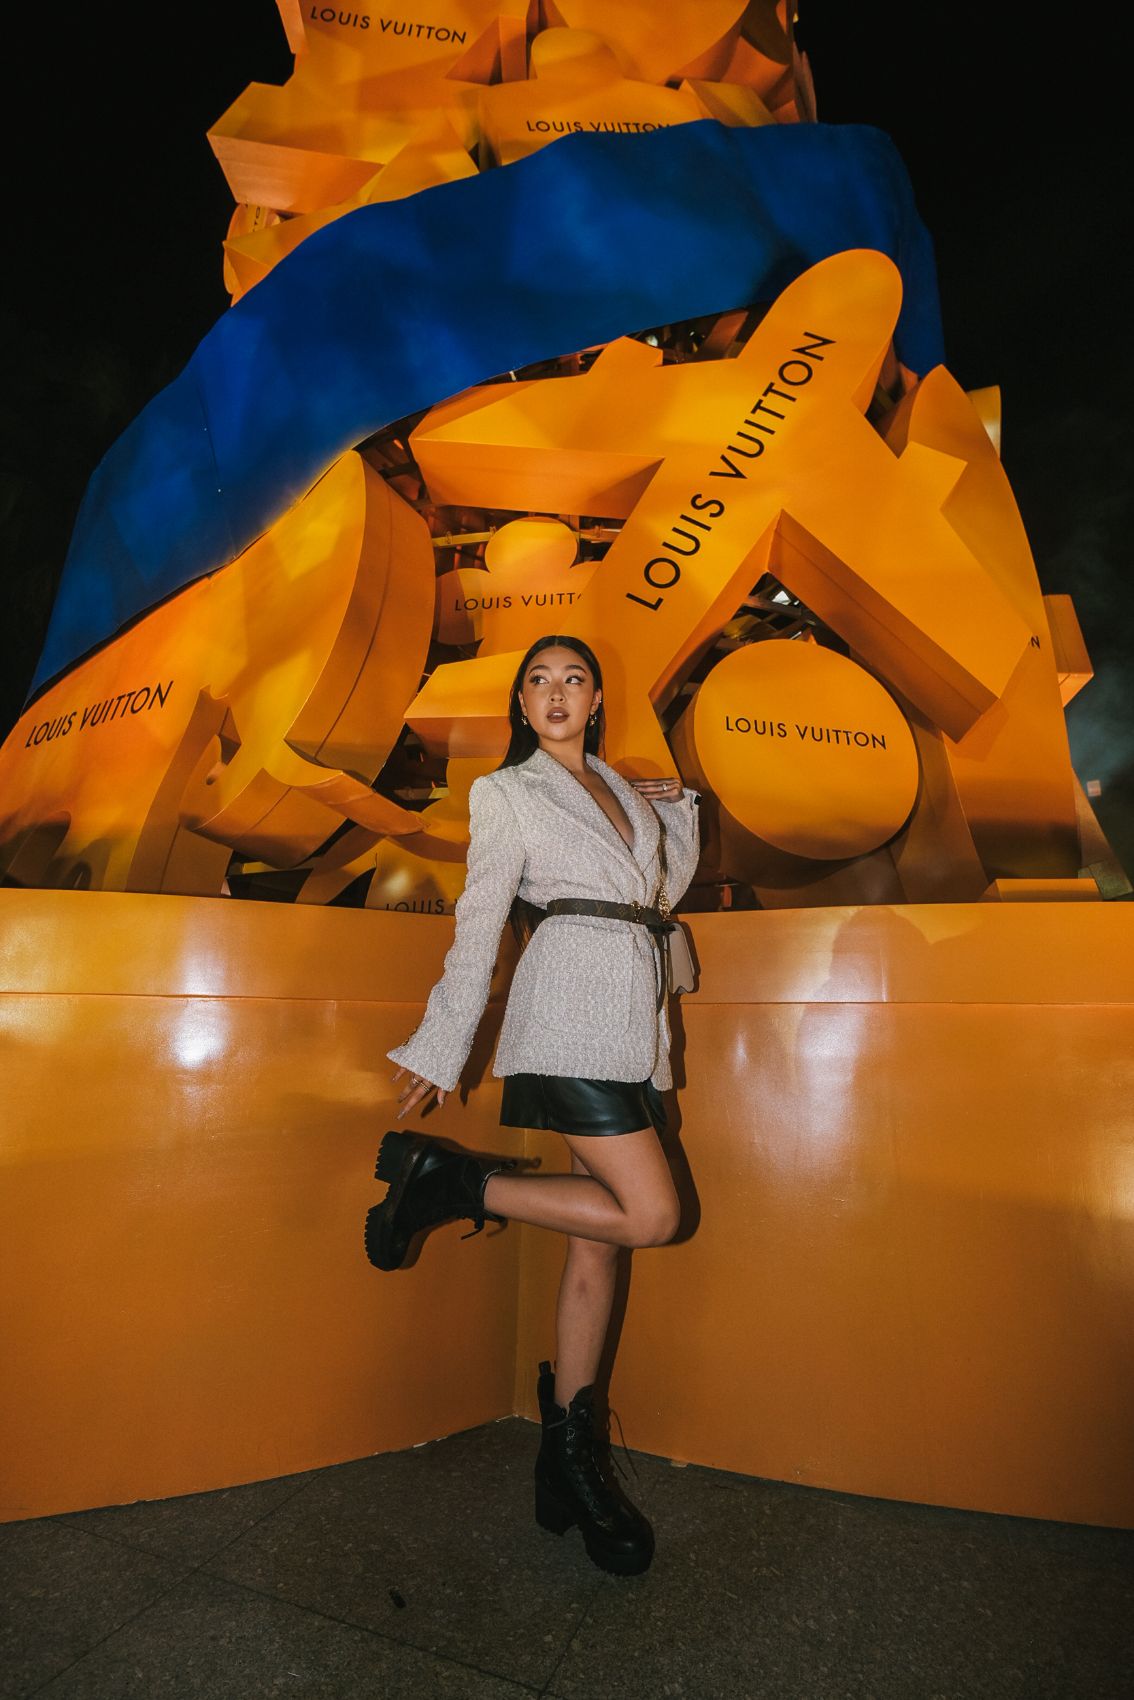 L'Officiel Philippines on X: #LouisVuitton ushers in the festive season by  bringing together stylish personalities and notable society fixtures to  light up the first Louis Vuitton Christmas tree in the Philippines led